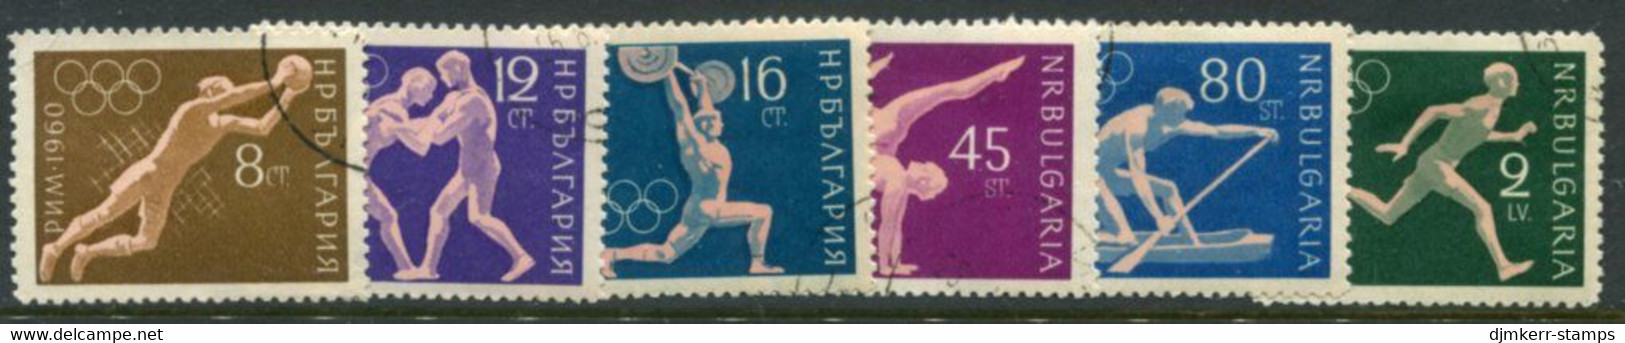 BULGARIA 1960 Olympic Games Perforated Used.  Michel 1172-77 - Used Stamps